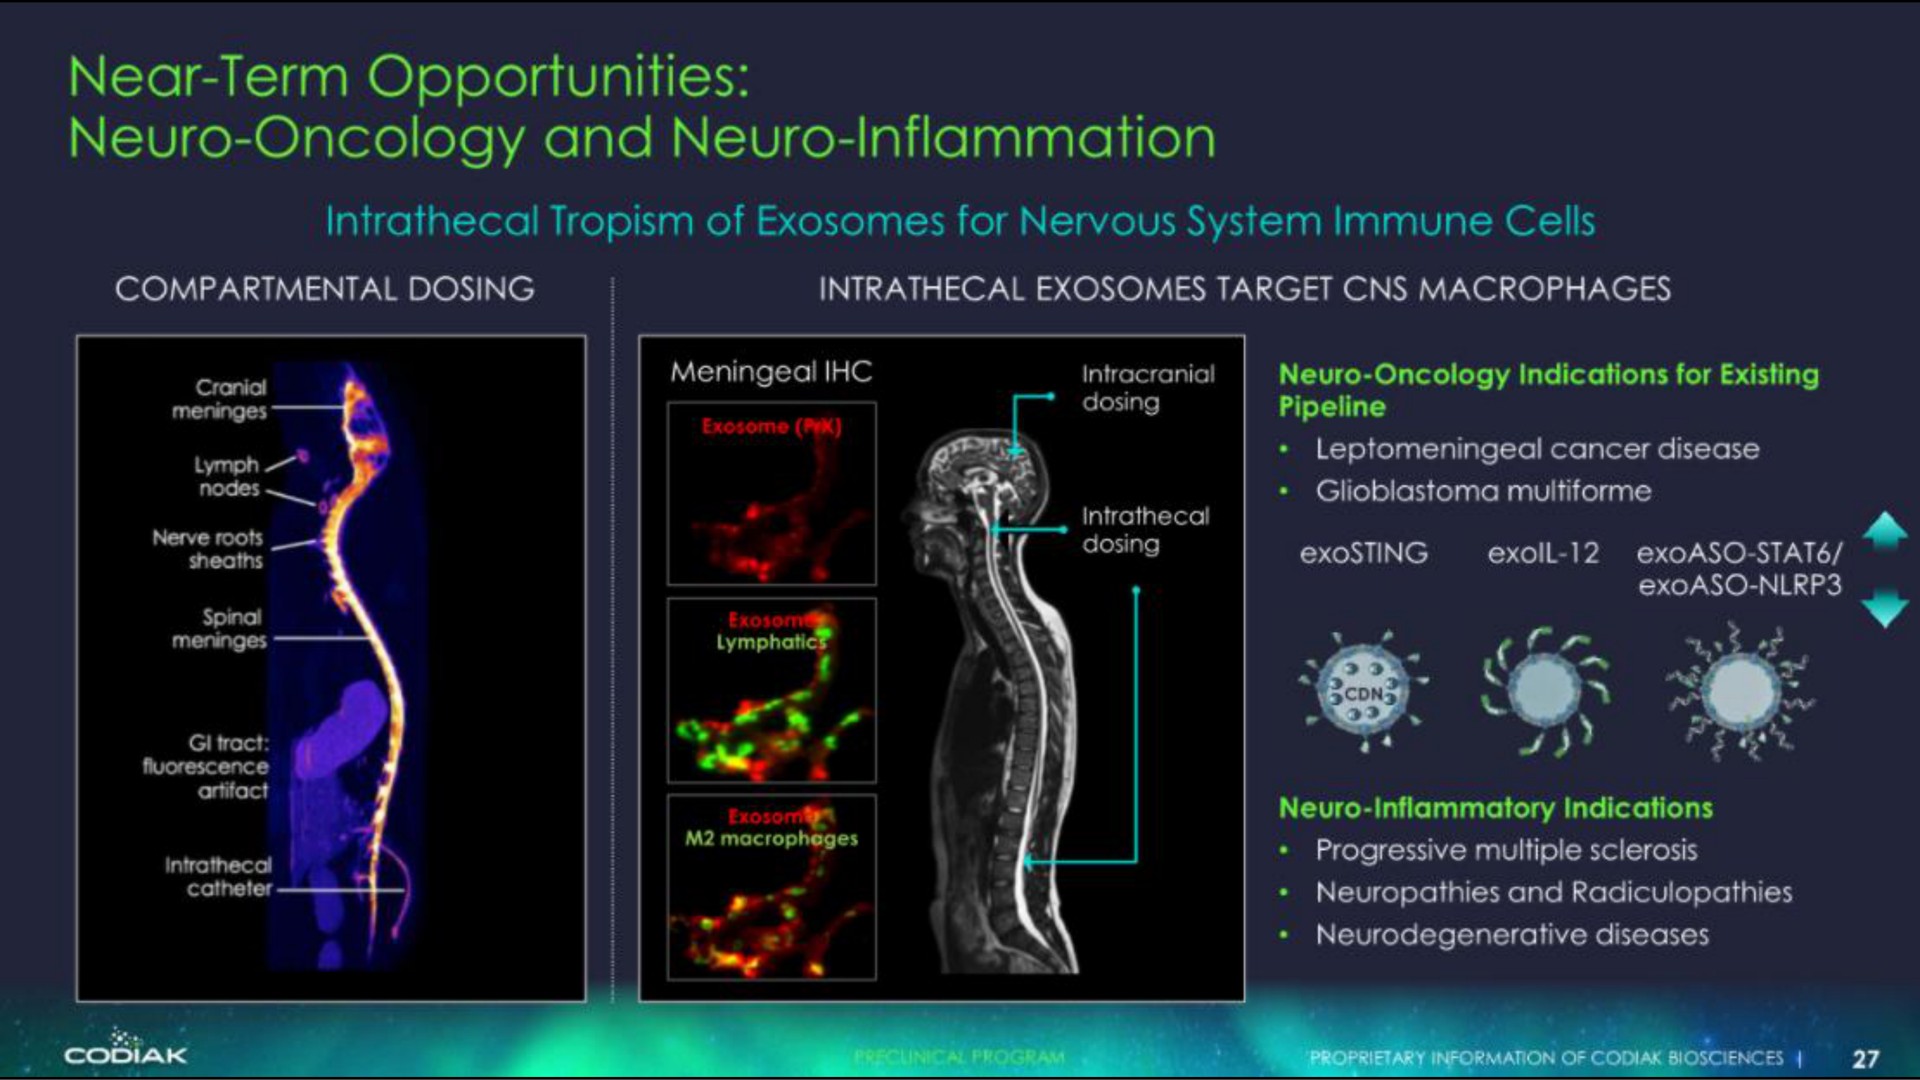 near term opportunities oncology and inflammation | Codiak